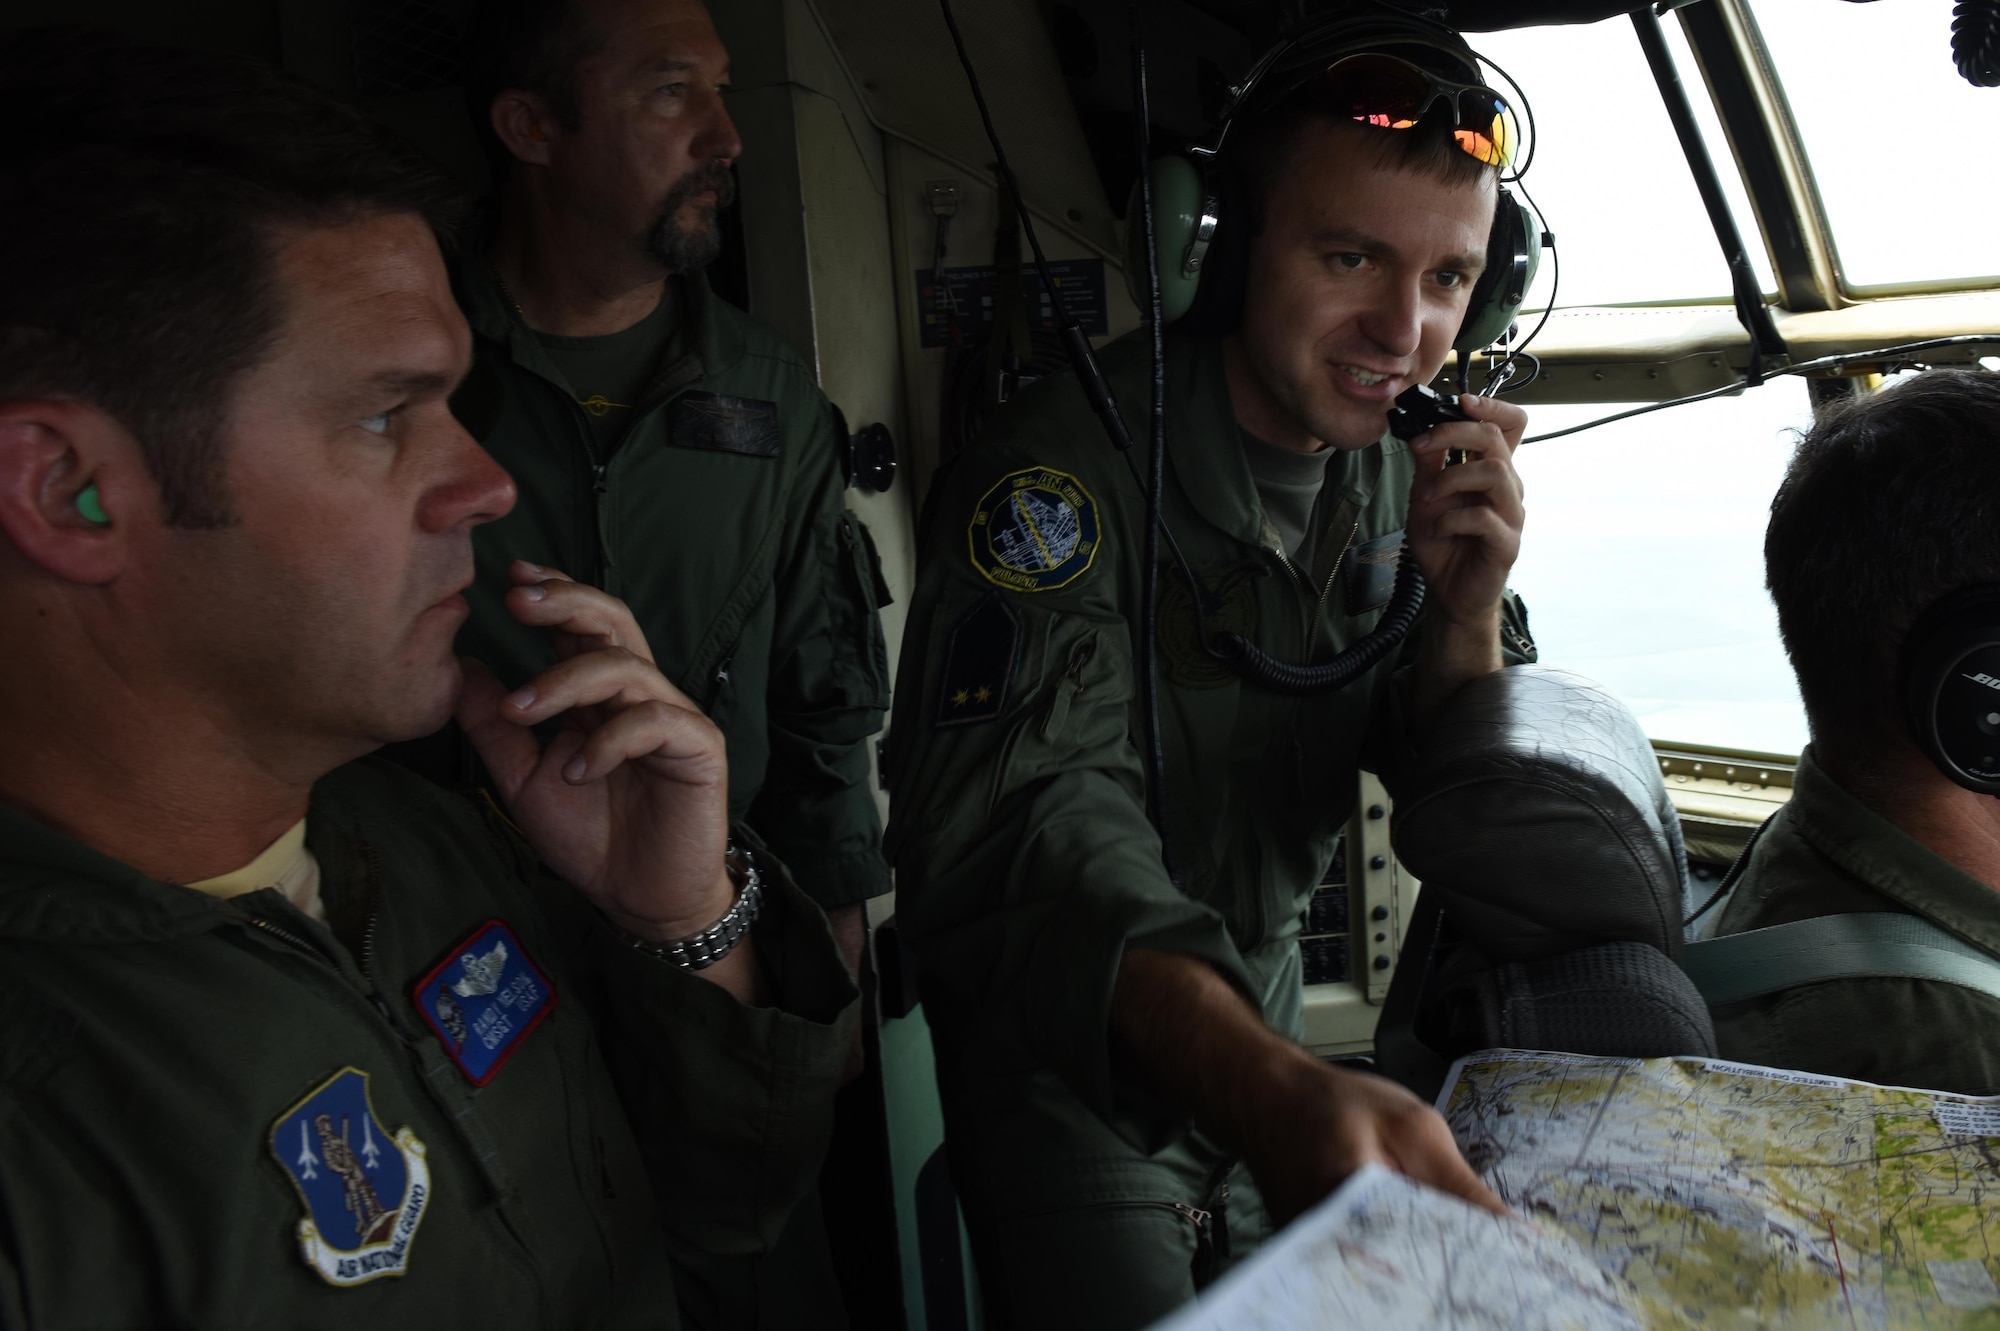 U.S. Air Force Chief Master Sgt. Randy Nelson (left), Hungarian Air Force Maj. Bela Torma (middle left), and Hungarian Air Force Lt. Lajos Halmi (right), both Hungarian AN-26 Antonov pilots, communicate with the two U.S. Air Force pilots during a C-130 flight, orienting them to the Ohio Air National Guard’s 179th Airlift Wing flying mission during Exercise Load Diffuser in Kecskemet, Hungary, on June 6. The exercise is the first Load Diffuser Exercise in Hungary in seven years and only the third of its kind in the two-decade State Partnership between Hungary and the Ohio National Guard.